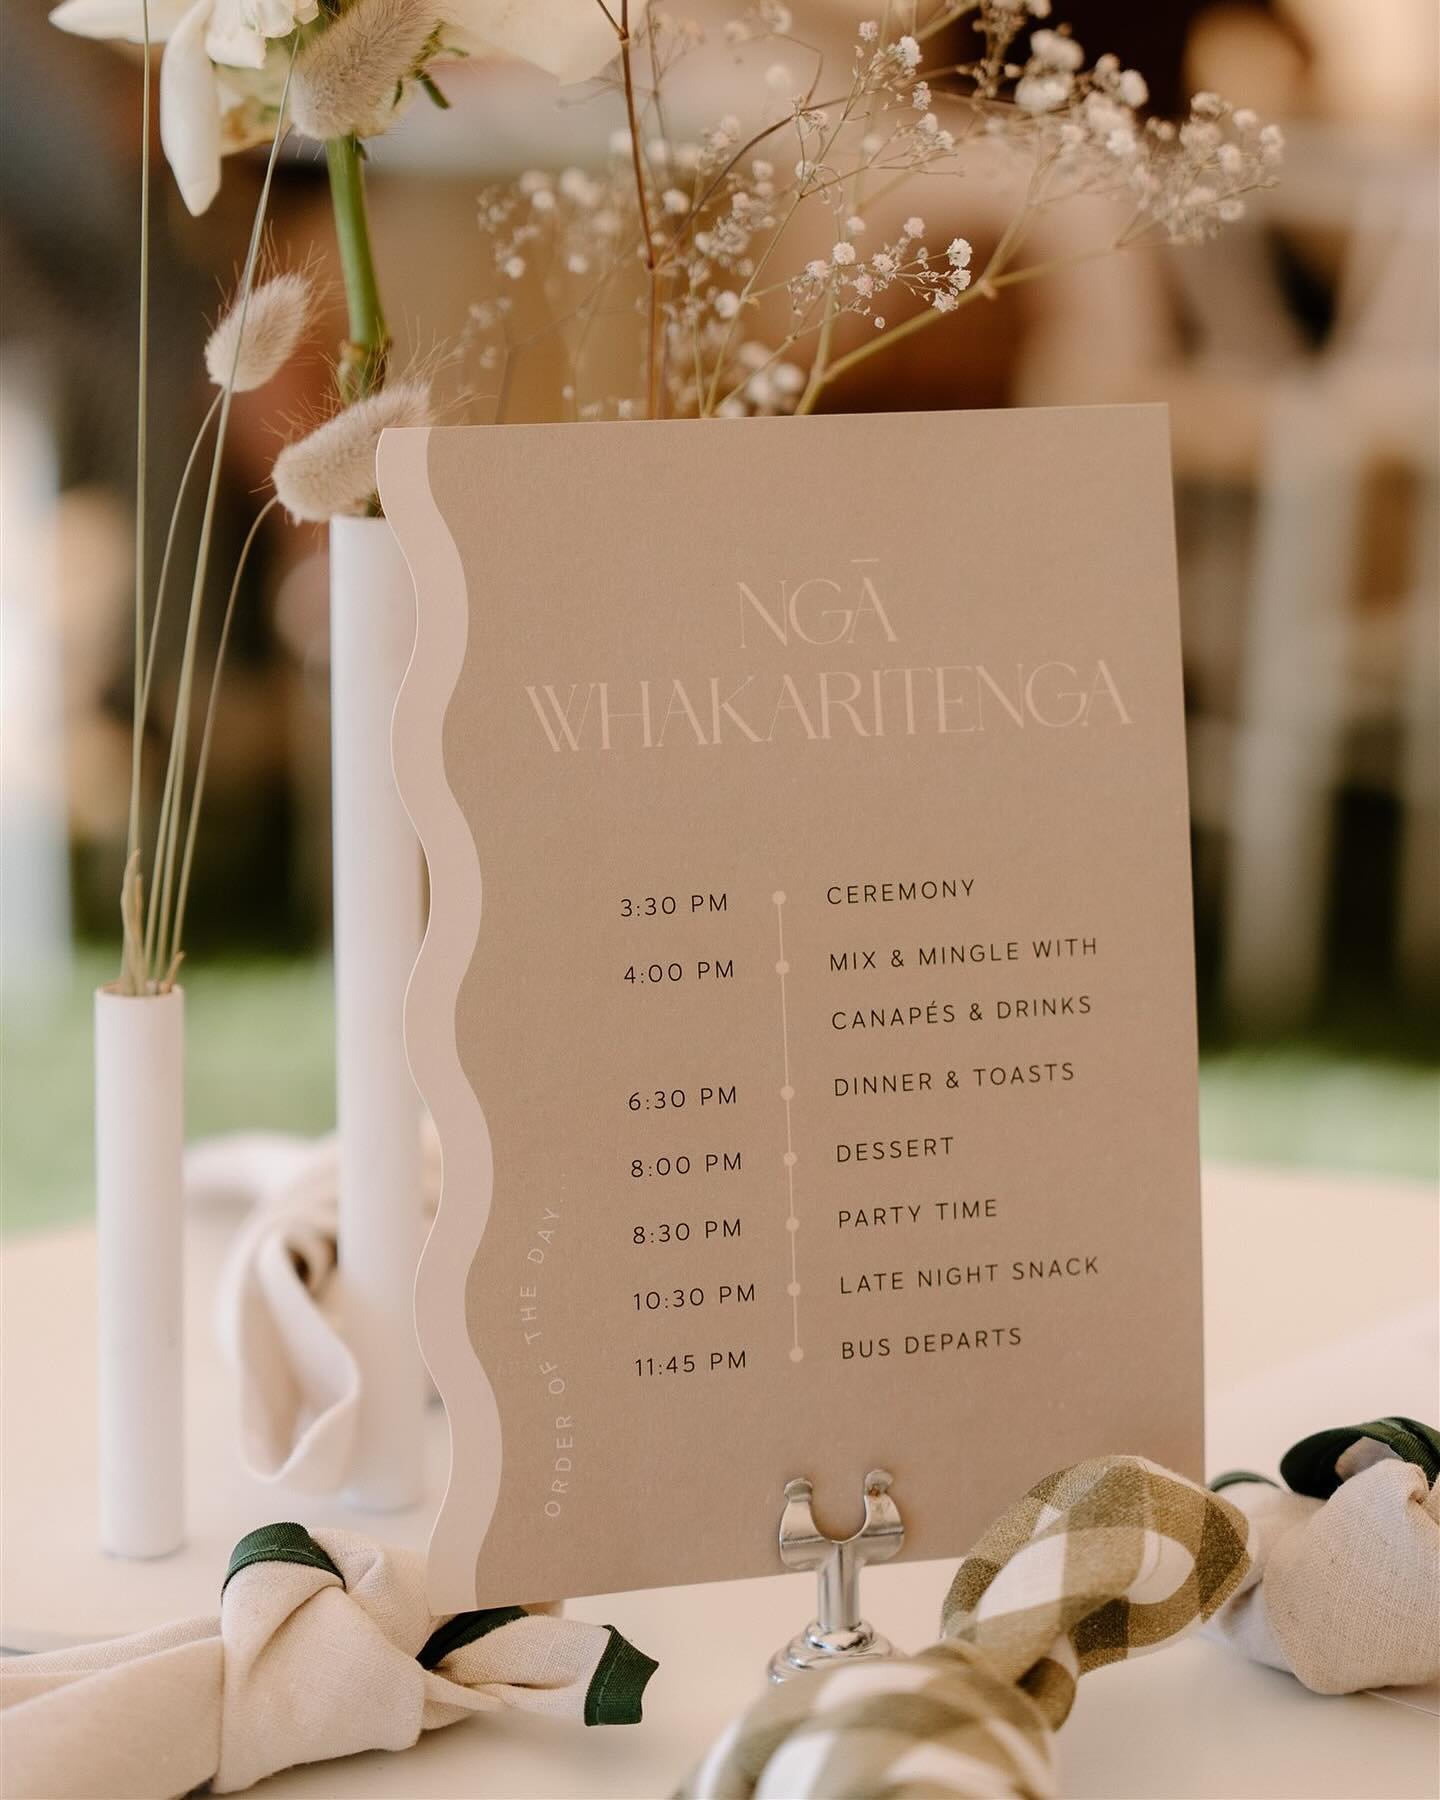 let&rsquo;s talk about walk and fork receptions 💭

@alexandrakatecreative brought this concept to life and we LOVE the idea of linen napkins as part of your walk and fork dining. For Sharna and Nick, they were simply placed on the bar and dotted aro